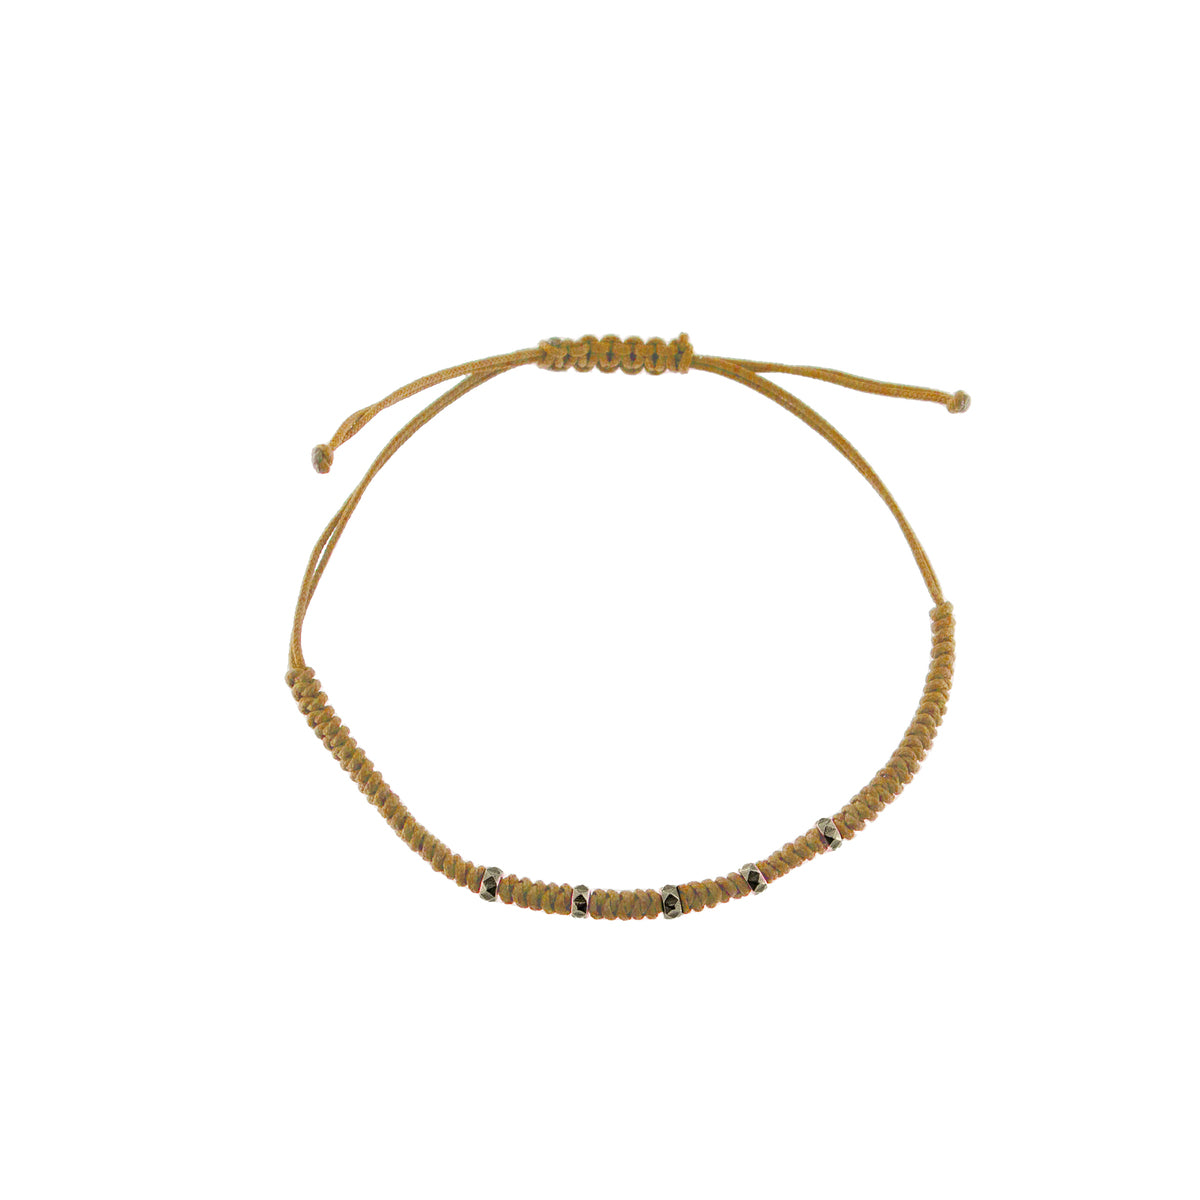 Bracelets - Bracelet with round weaving and mini studs - TANGLE - 3 | Rue des Mille